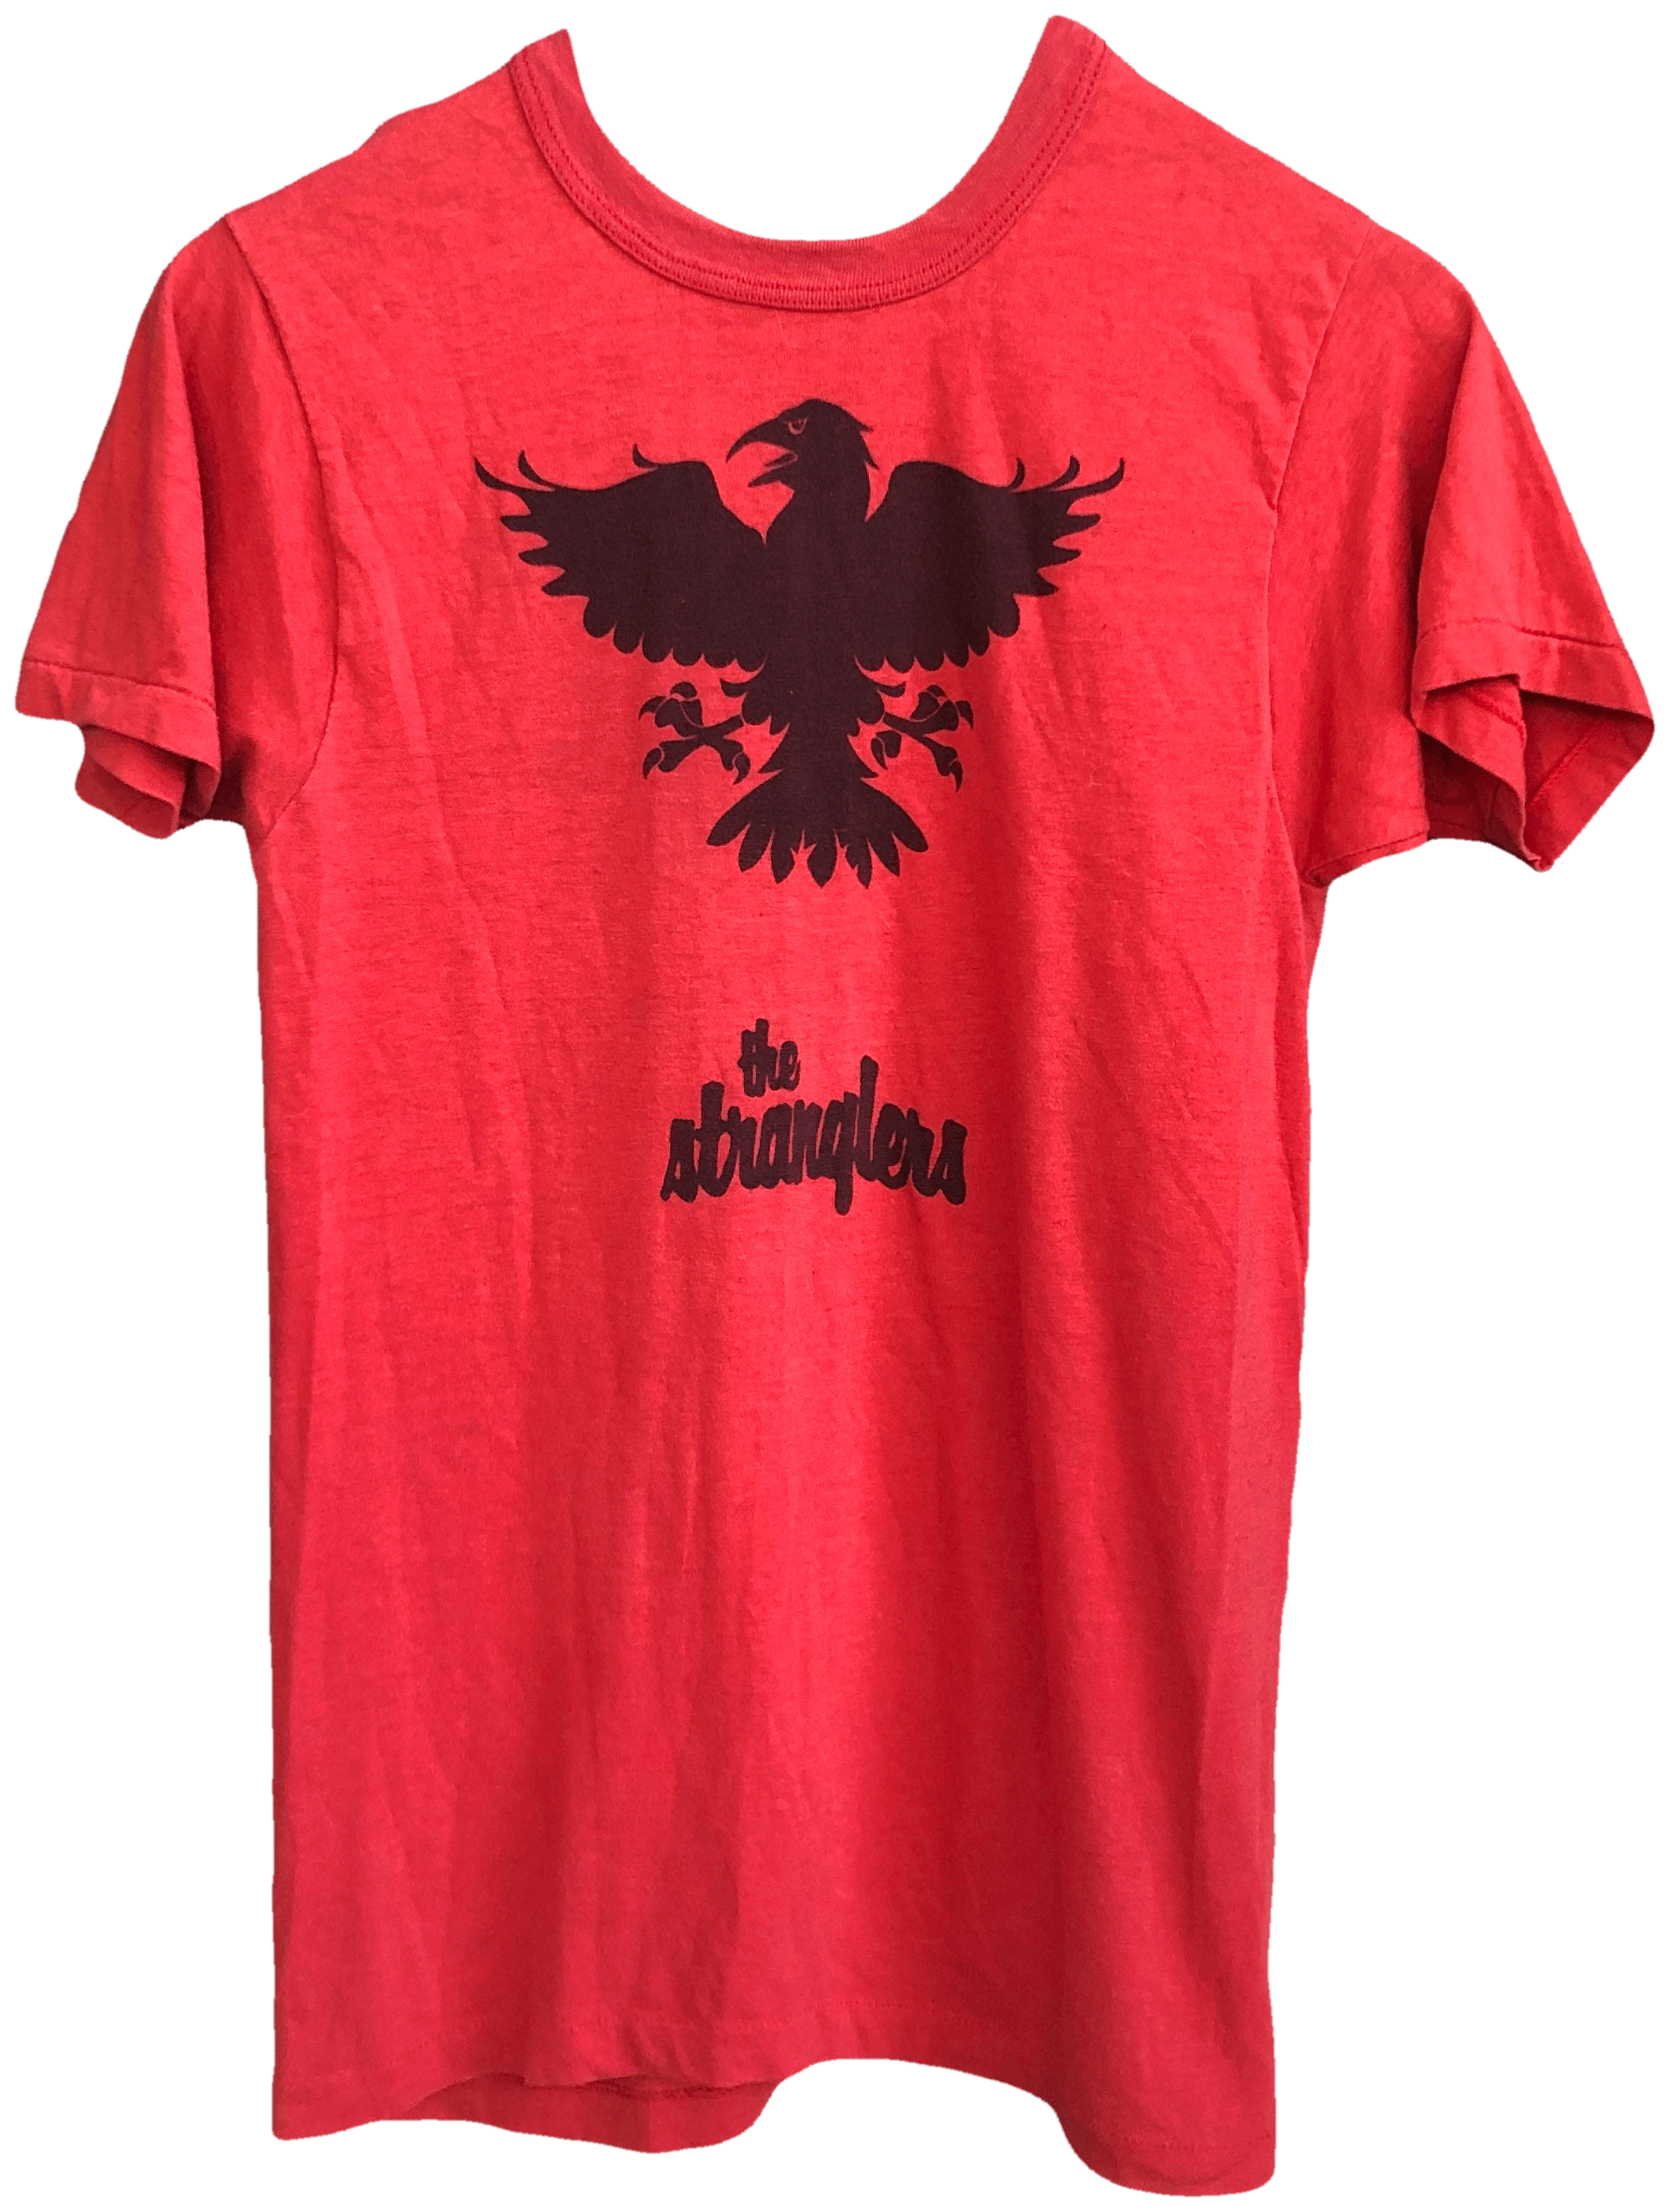 Vintage 80’s Red T-Shirt with Bird Black Graphic | Shop THRILLING